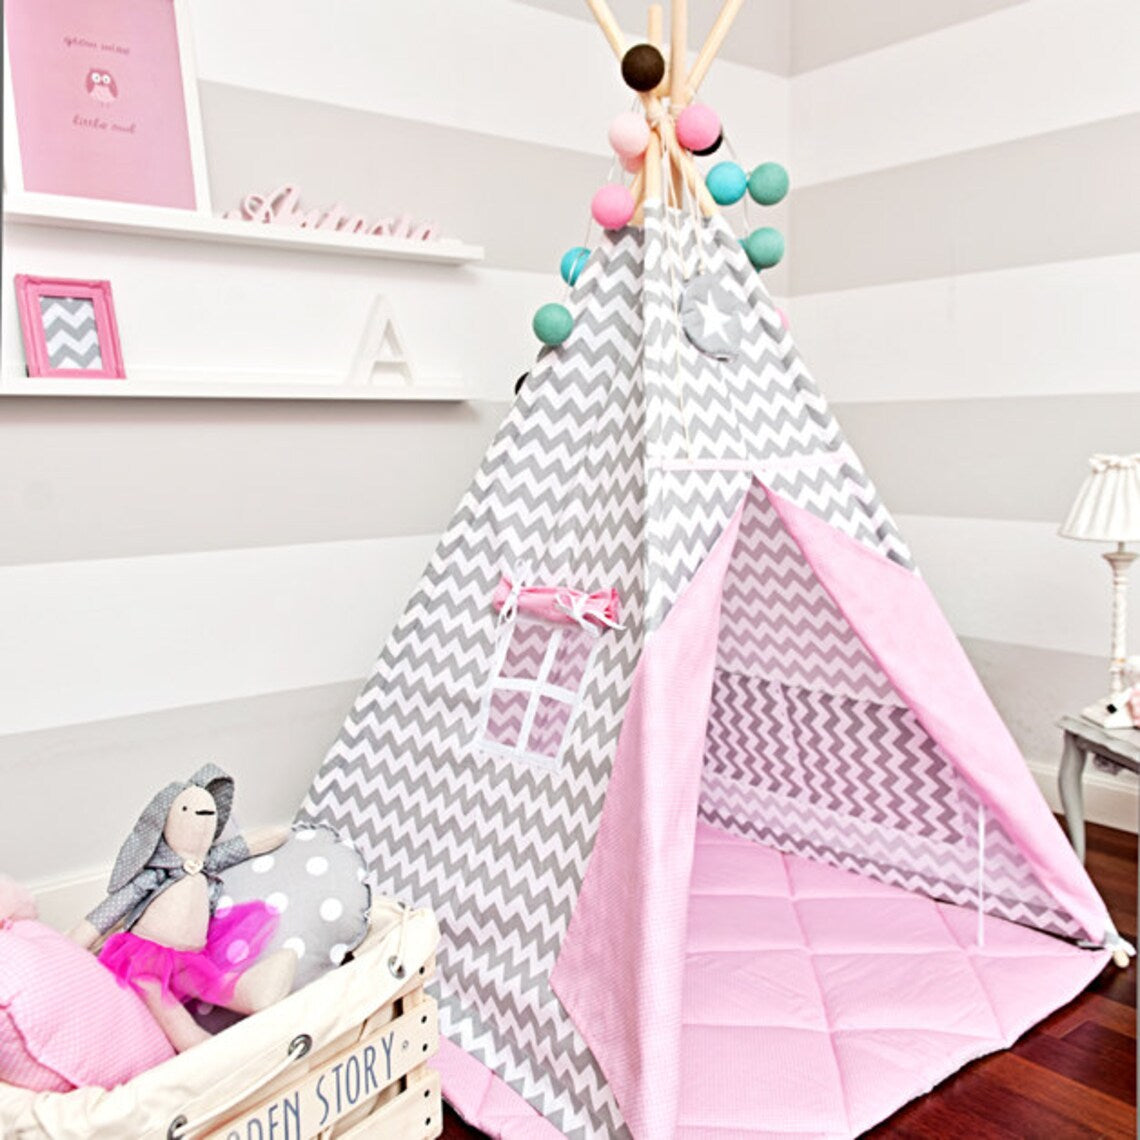 Premium Teepee Set with Floor Mat, Pillows, Garland and Basket